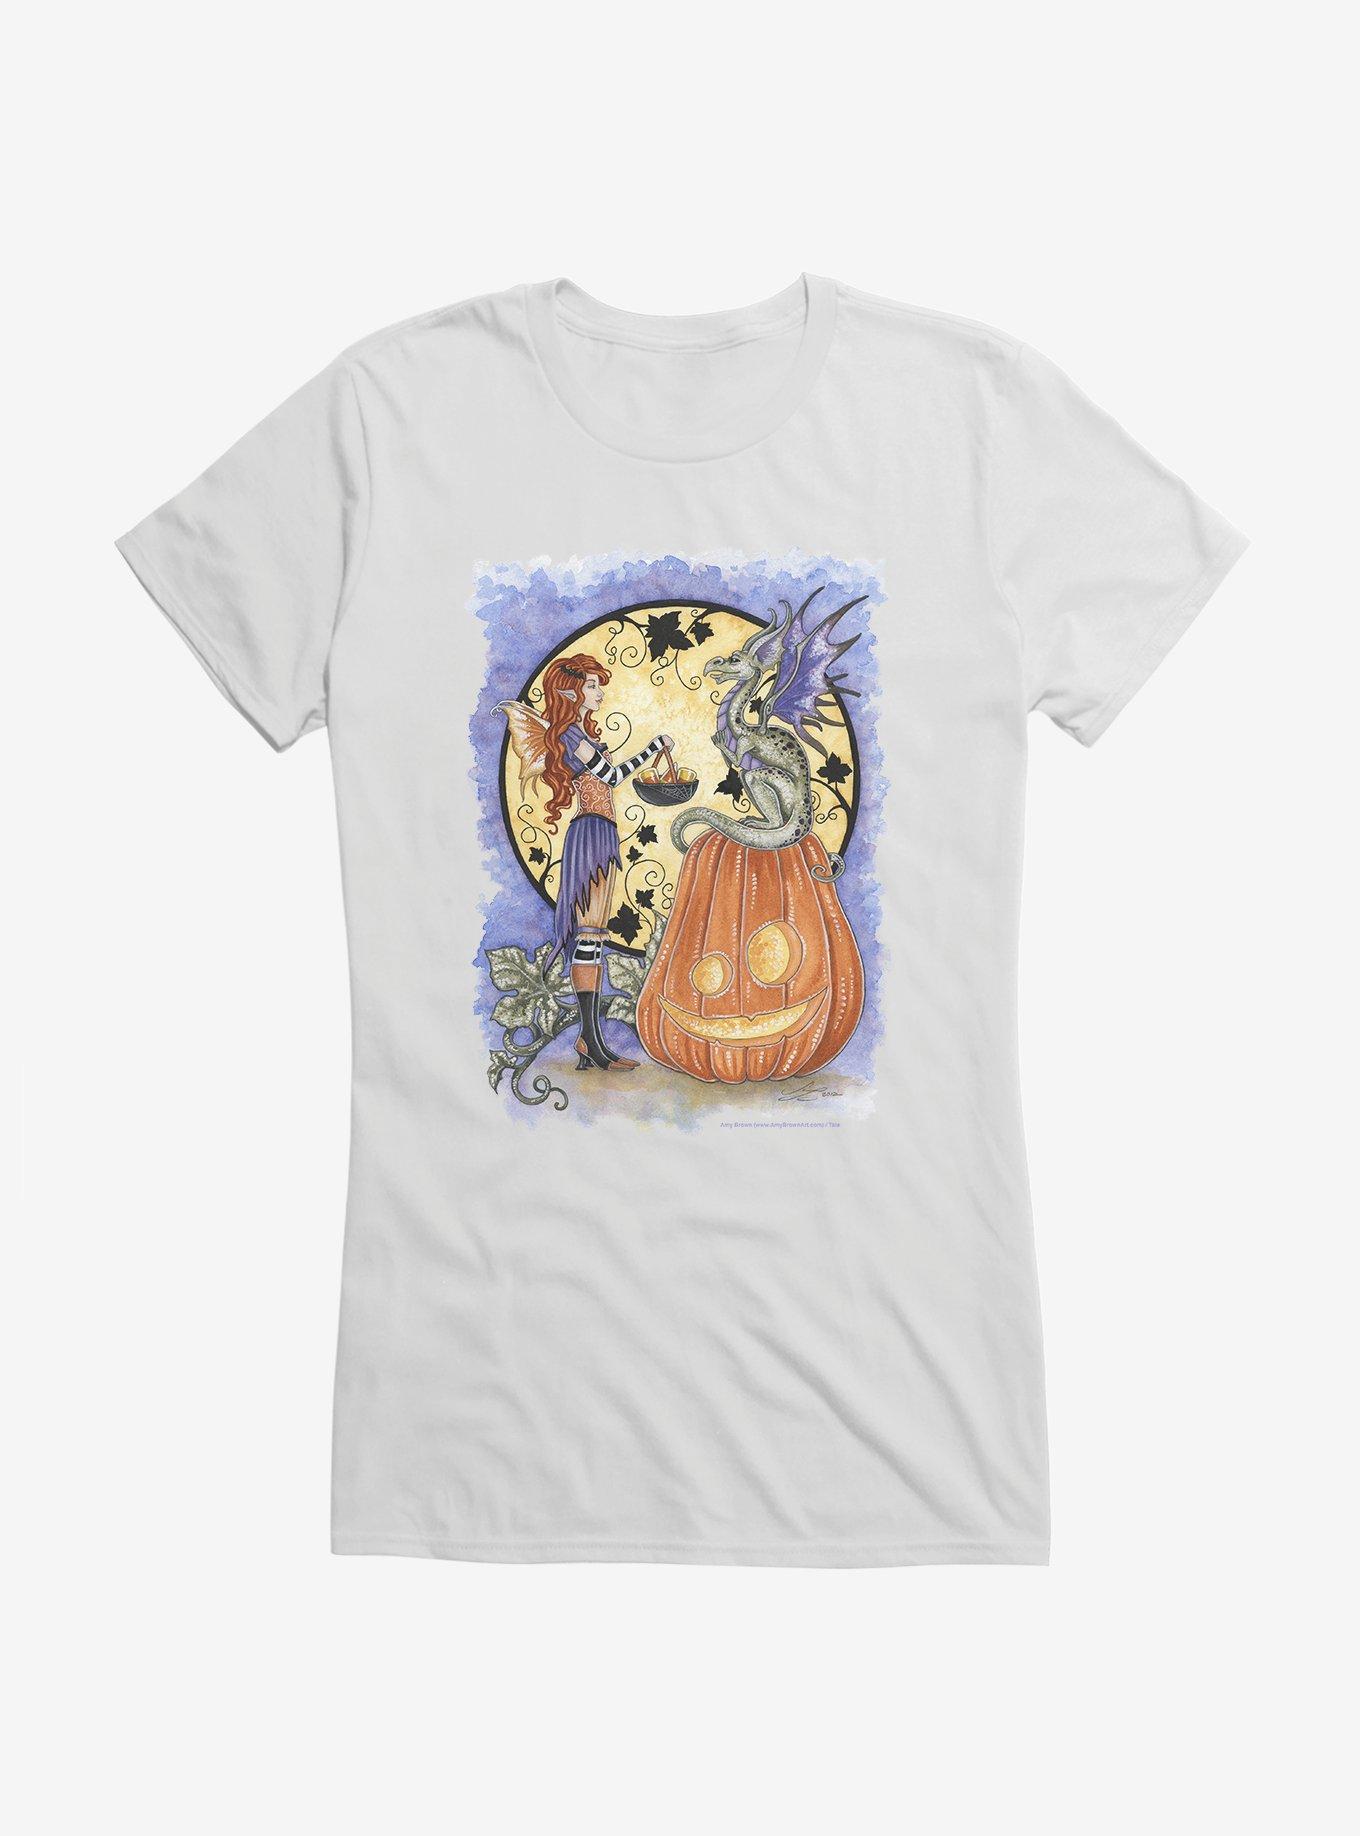 Dragons Love Candy Corn Girls T-Shirt by Amy Brown